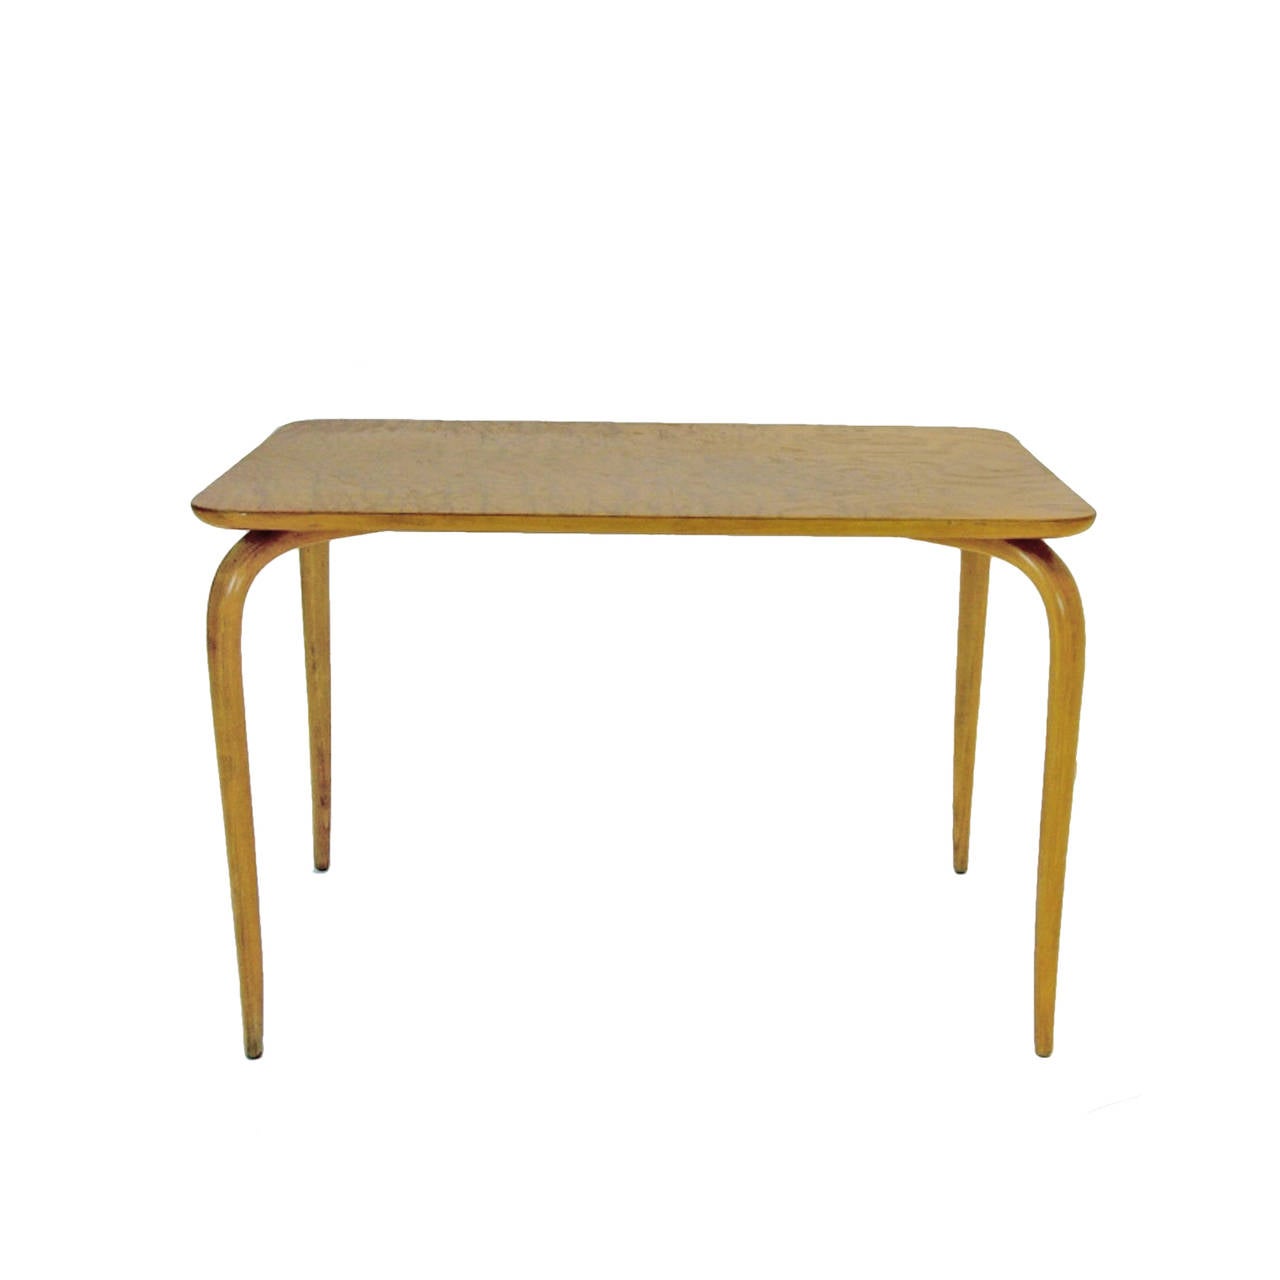 Lovely sculptural birch table with a stunning burled birch top.